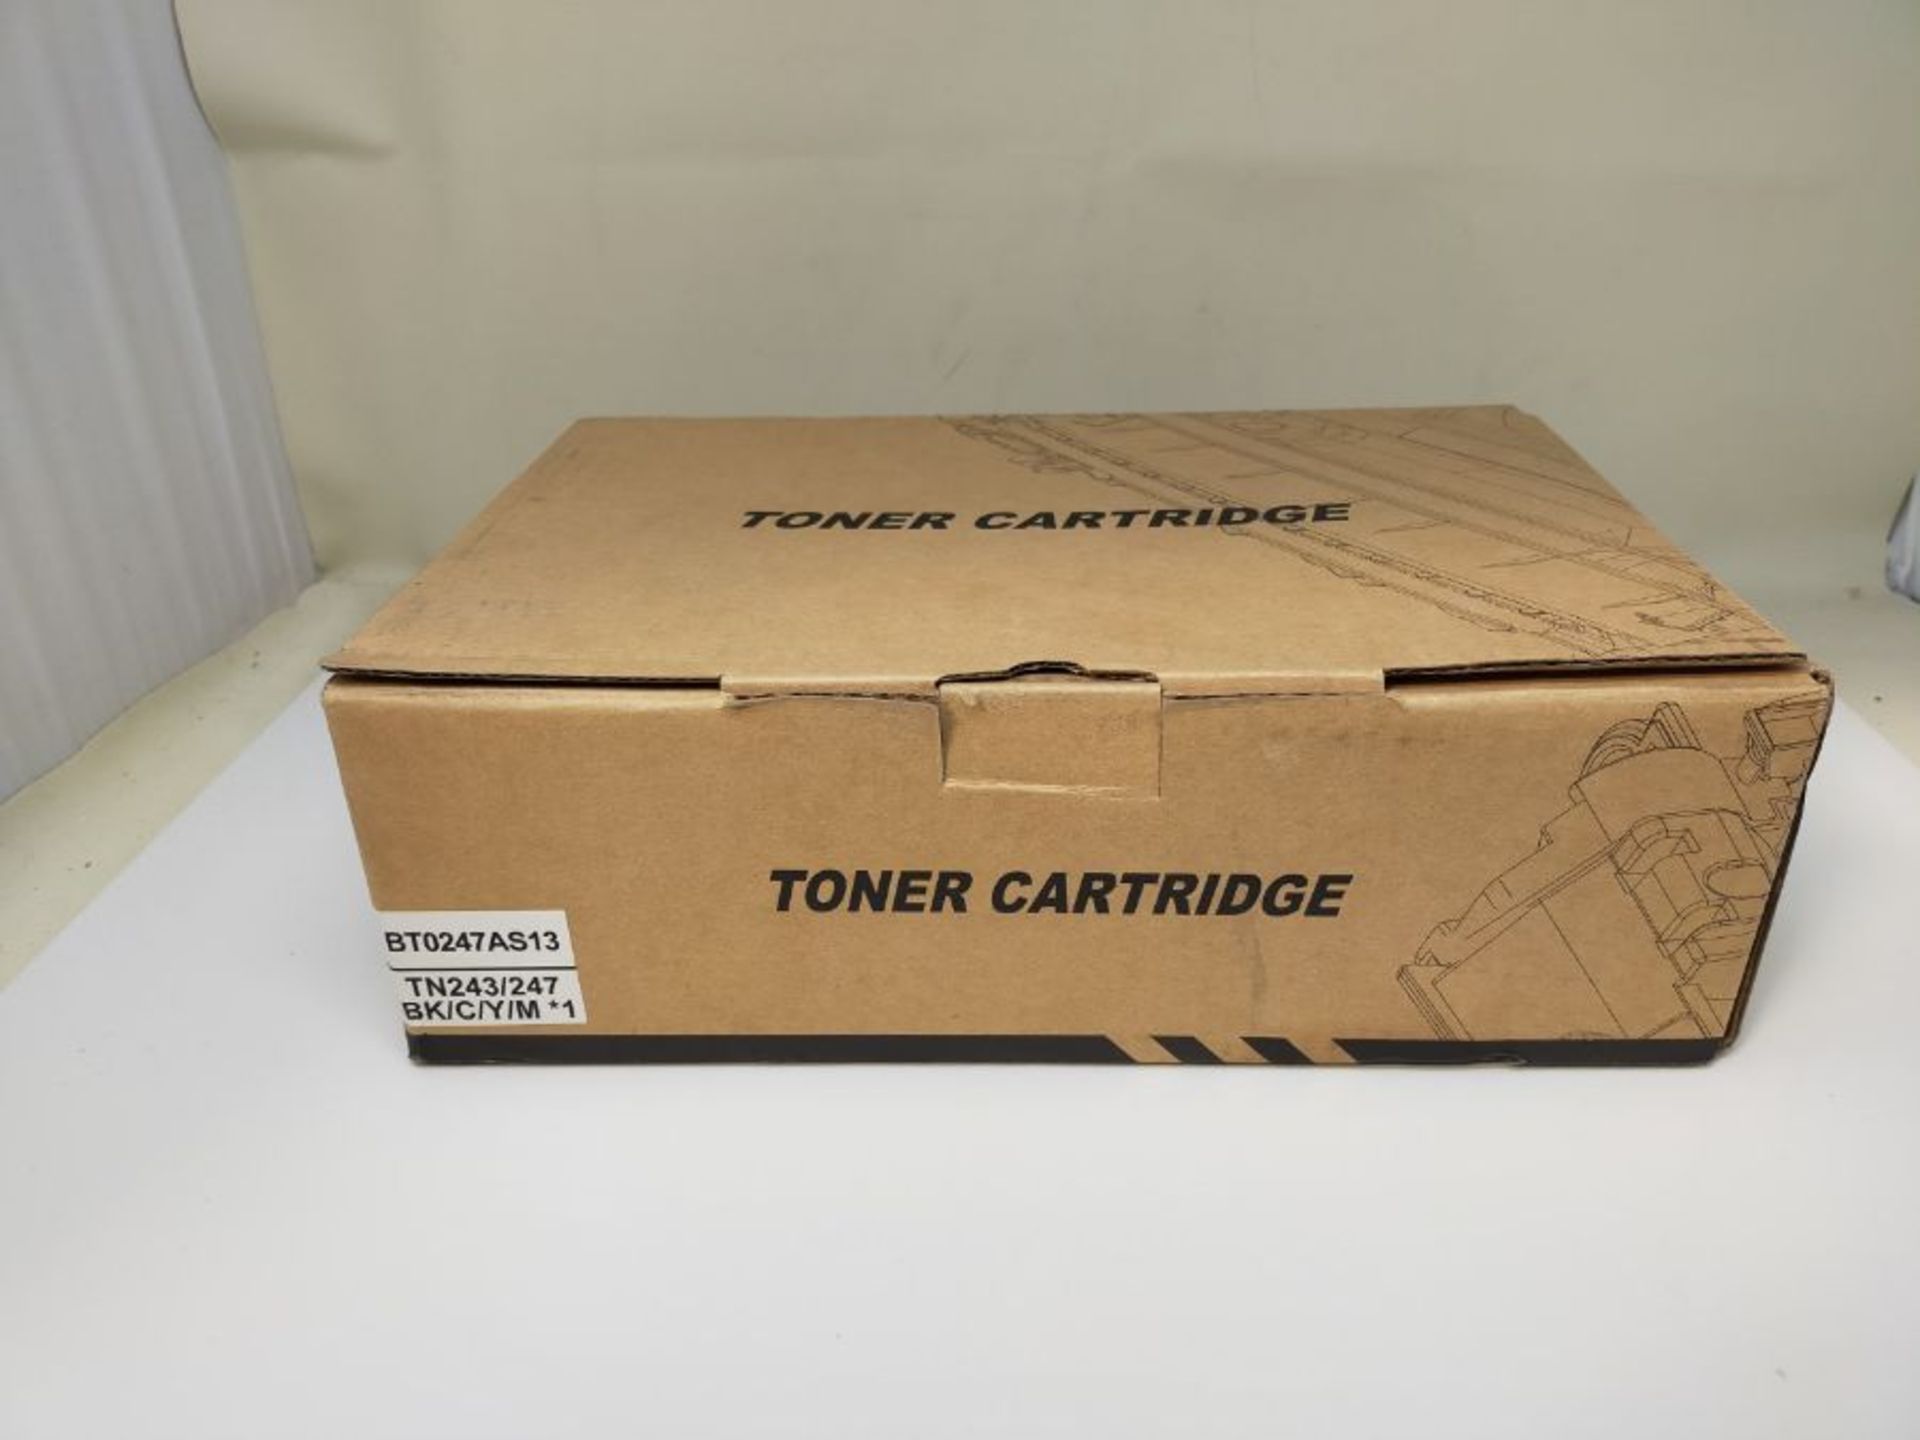 GREENSKY Compatible Toner Cartridges Replacement for Brother TN247 TN243 for MFC-L3710 - Image 2 of 3